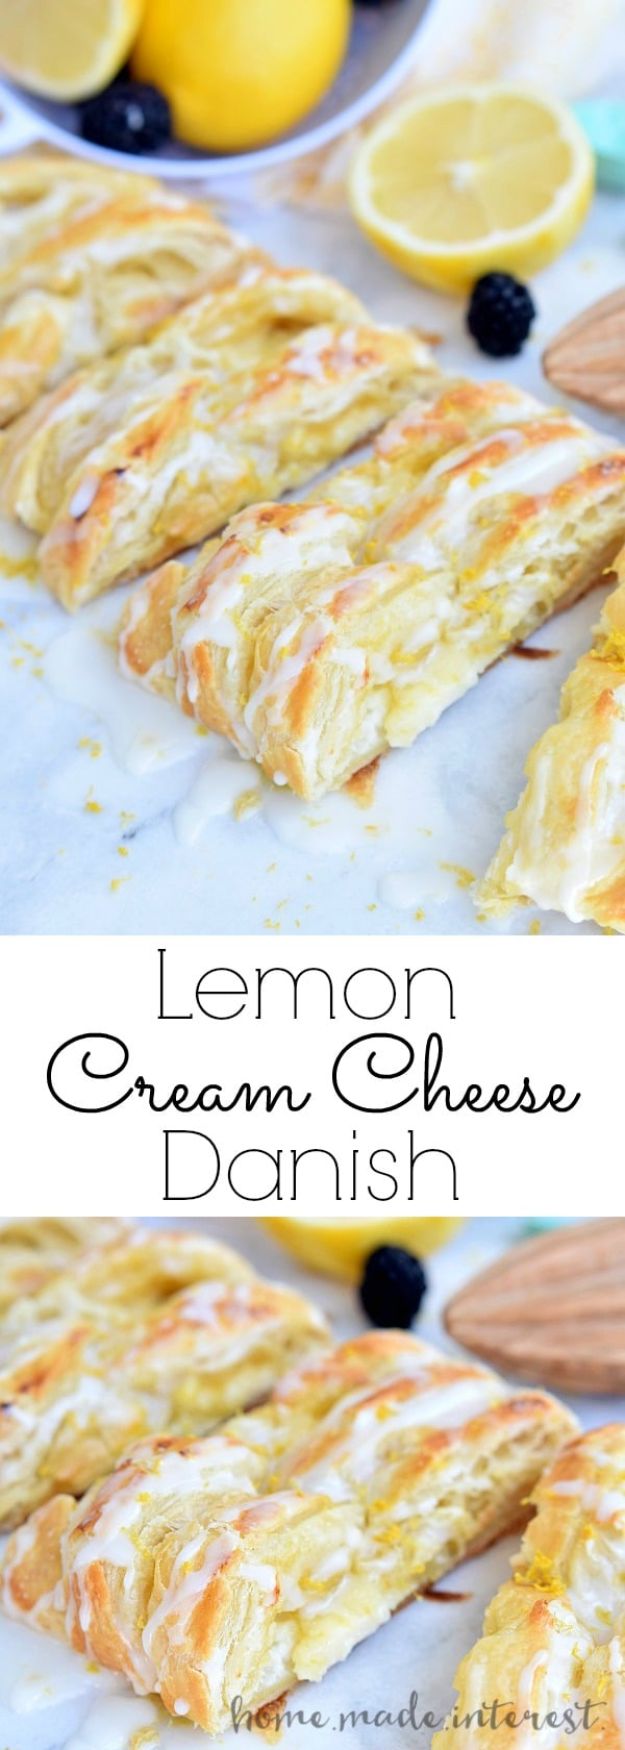 Best Recipes for the Cheese Lover - Lemon Cream Cheese Danish - Easy Recipe Ideas With Cheese - Homemade Appetizers, Dips, Dinners, Snacks, Pasta Dishes, Healthy Lunches and Soups Made With Your Favorite Cheeses - Ricotta, Cheddar, Swiss, Parmesan, Goat Chevre, Mozzarella and Feta Ideas - Grilled, Healthy, Vegan and Vegetarian #cheeserecipes #recipes #recipeideas #cheese #cheeserecipe 